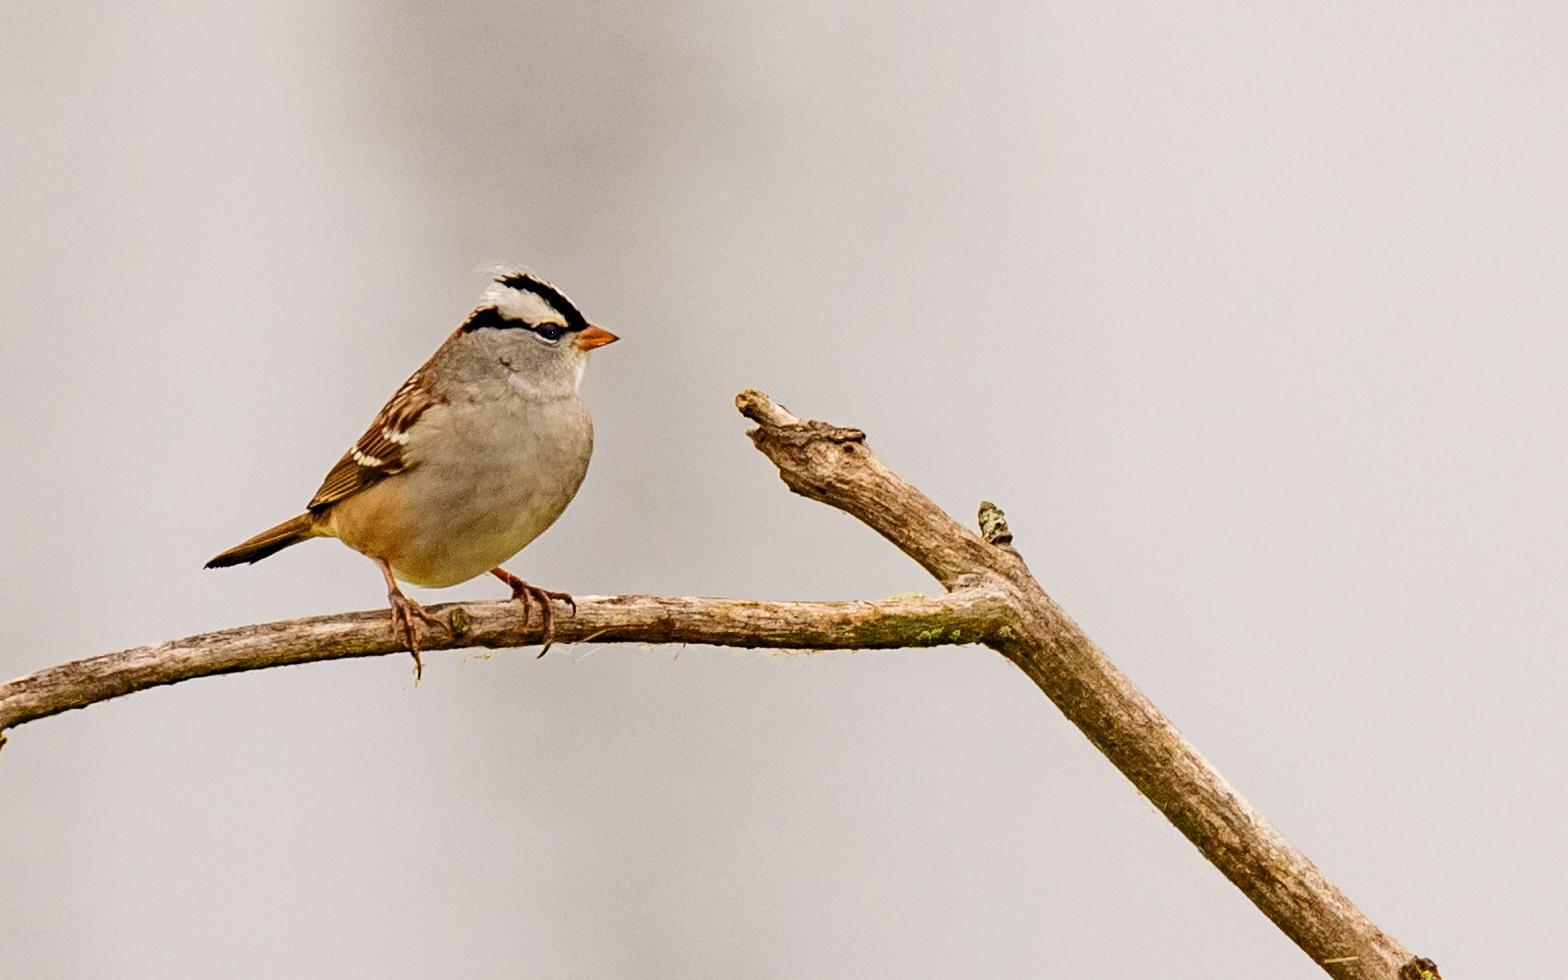 White-crowned Sparrow Photo by Keshava Mysore